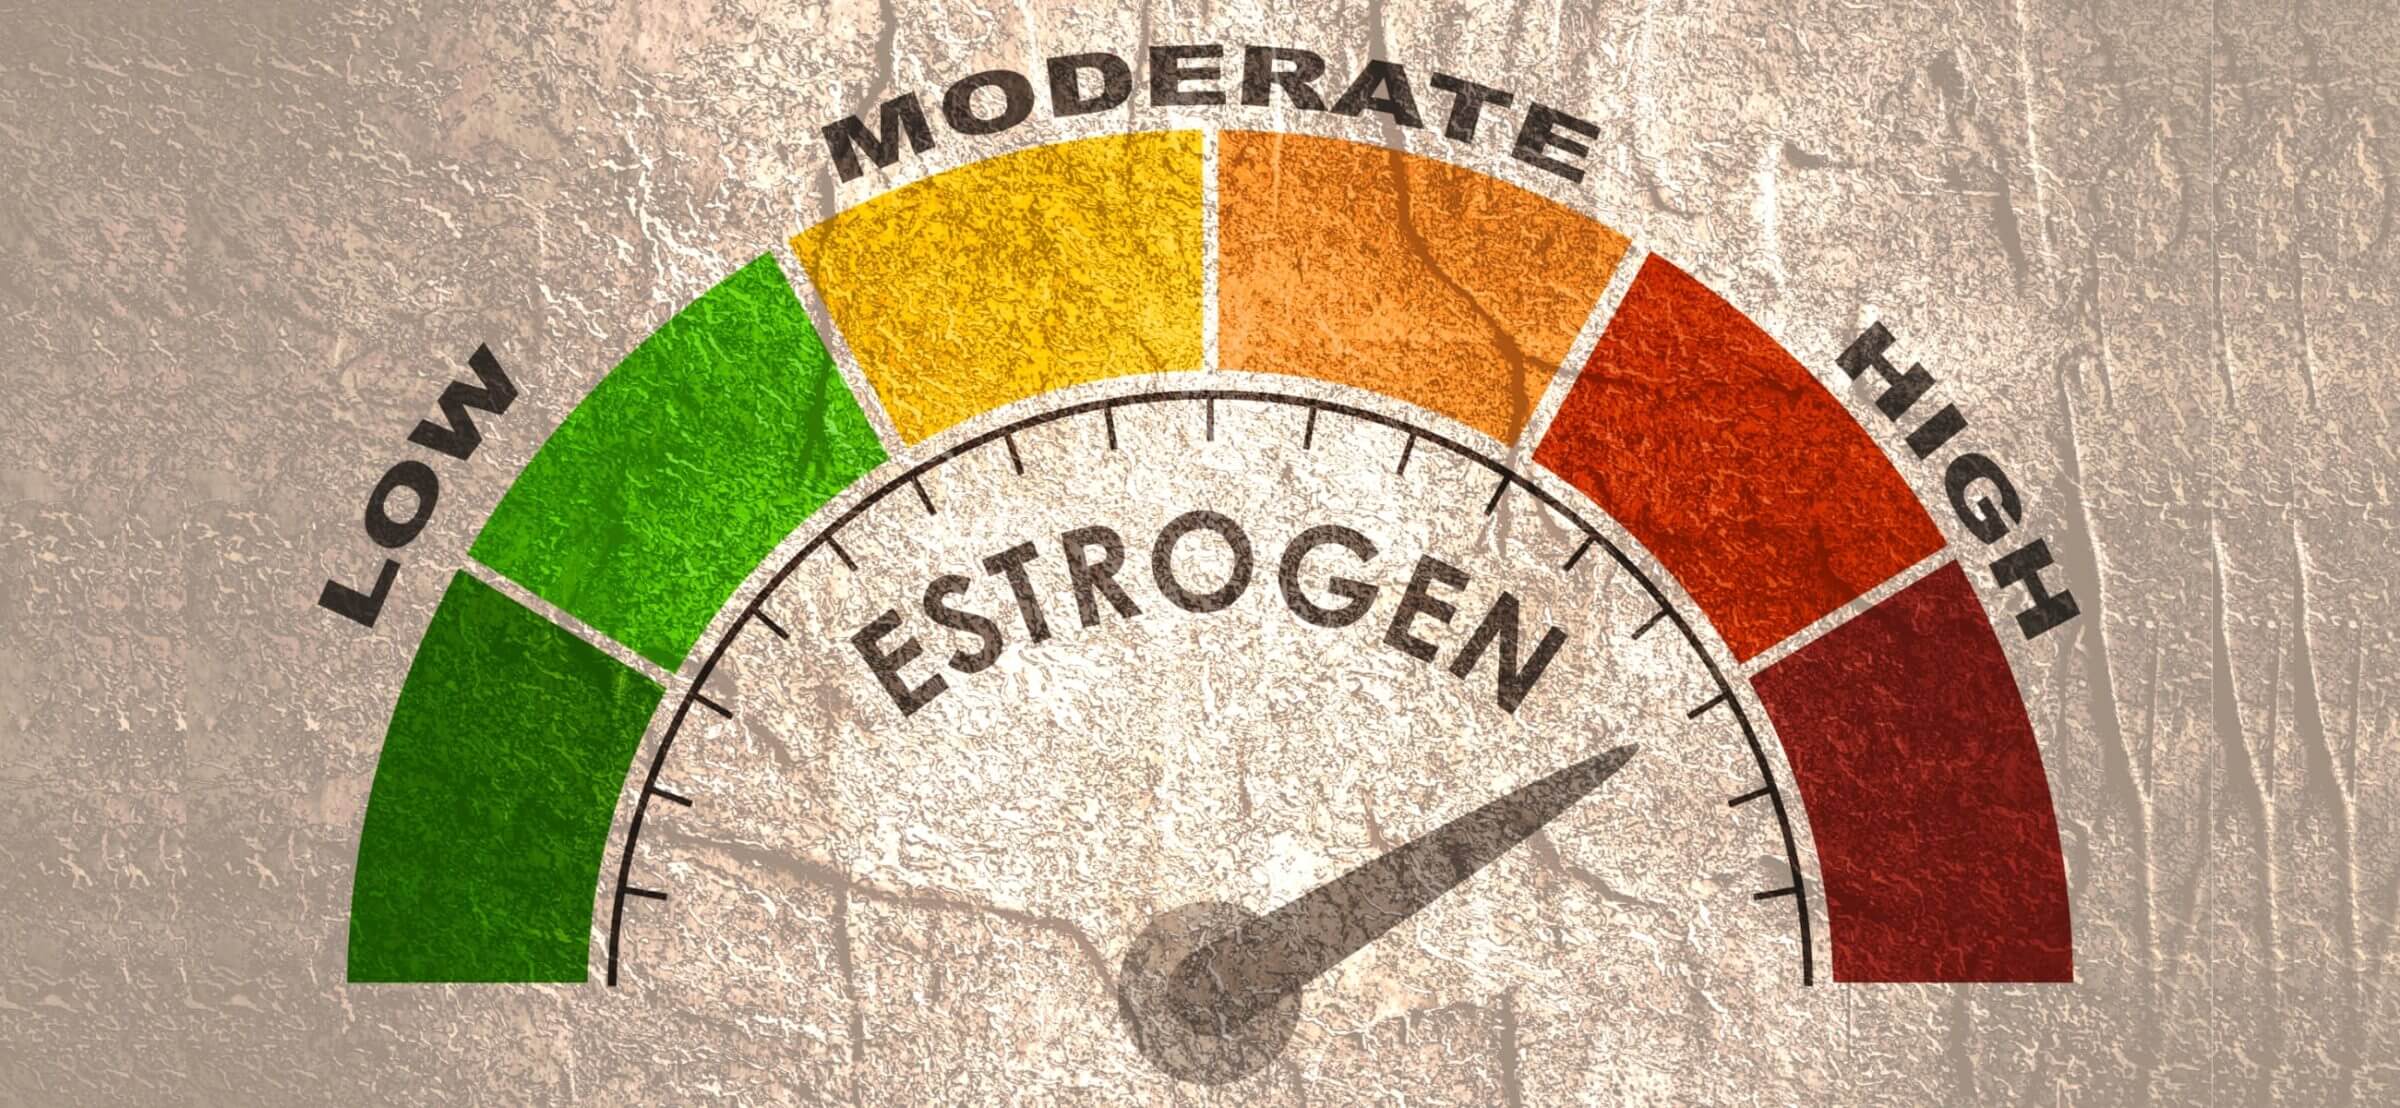 Avoid Xenoestrogen, Estrogen-like Compounds, Alcohol and Follow a Healthy Lifestyle